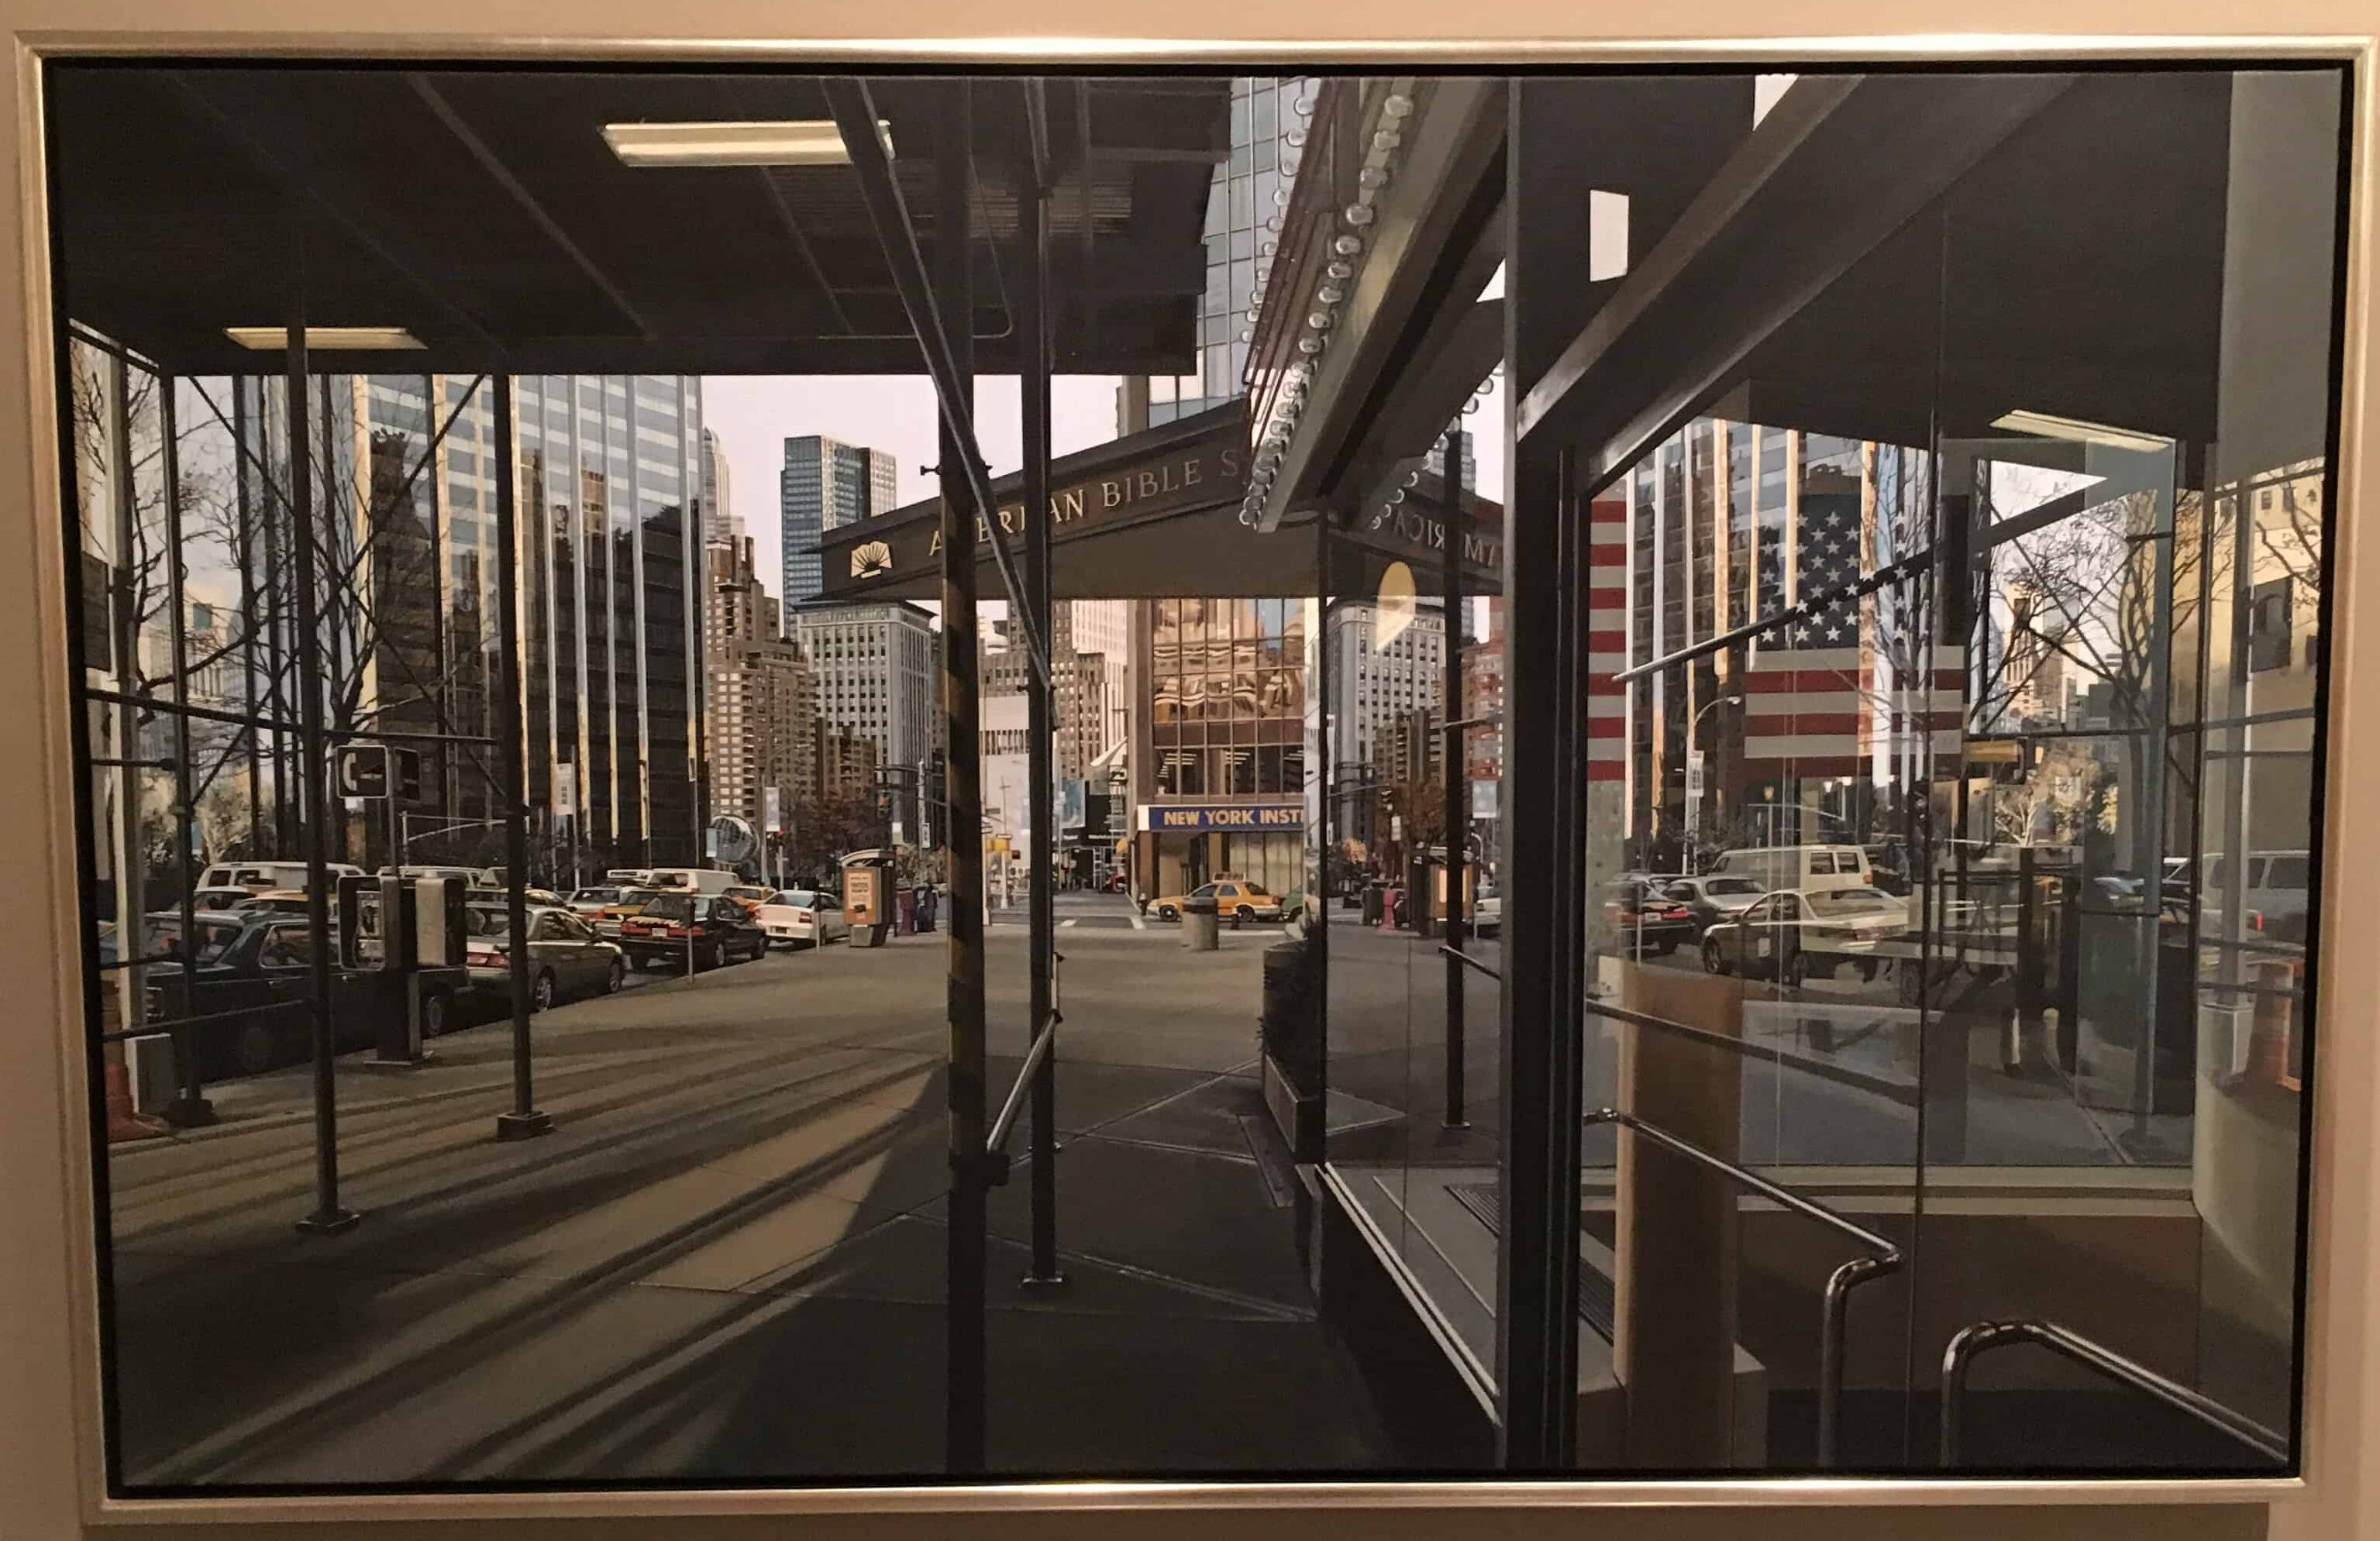 Broadway Looking Towards Columbus Circle, Richard Estes (USA), 2002 at the Antioquia Museum in Medellín, Colombia